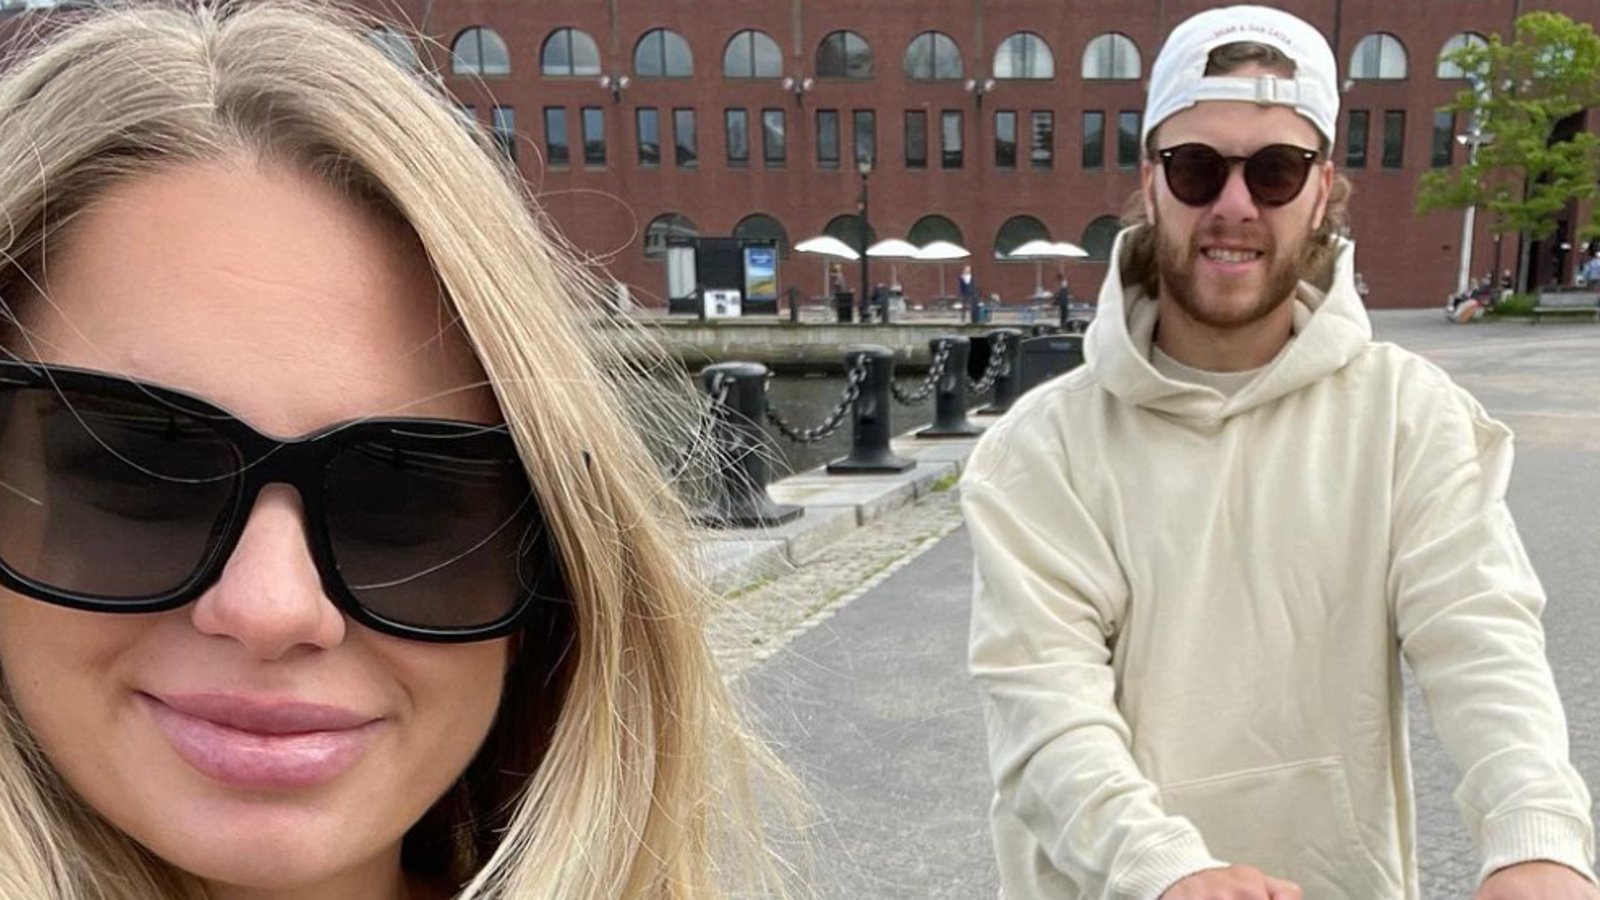 An emotional David Pastrnak shares huge news for his family